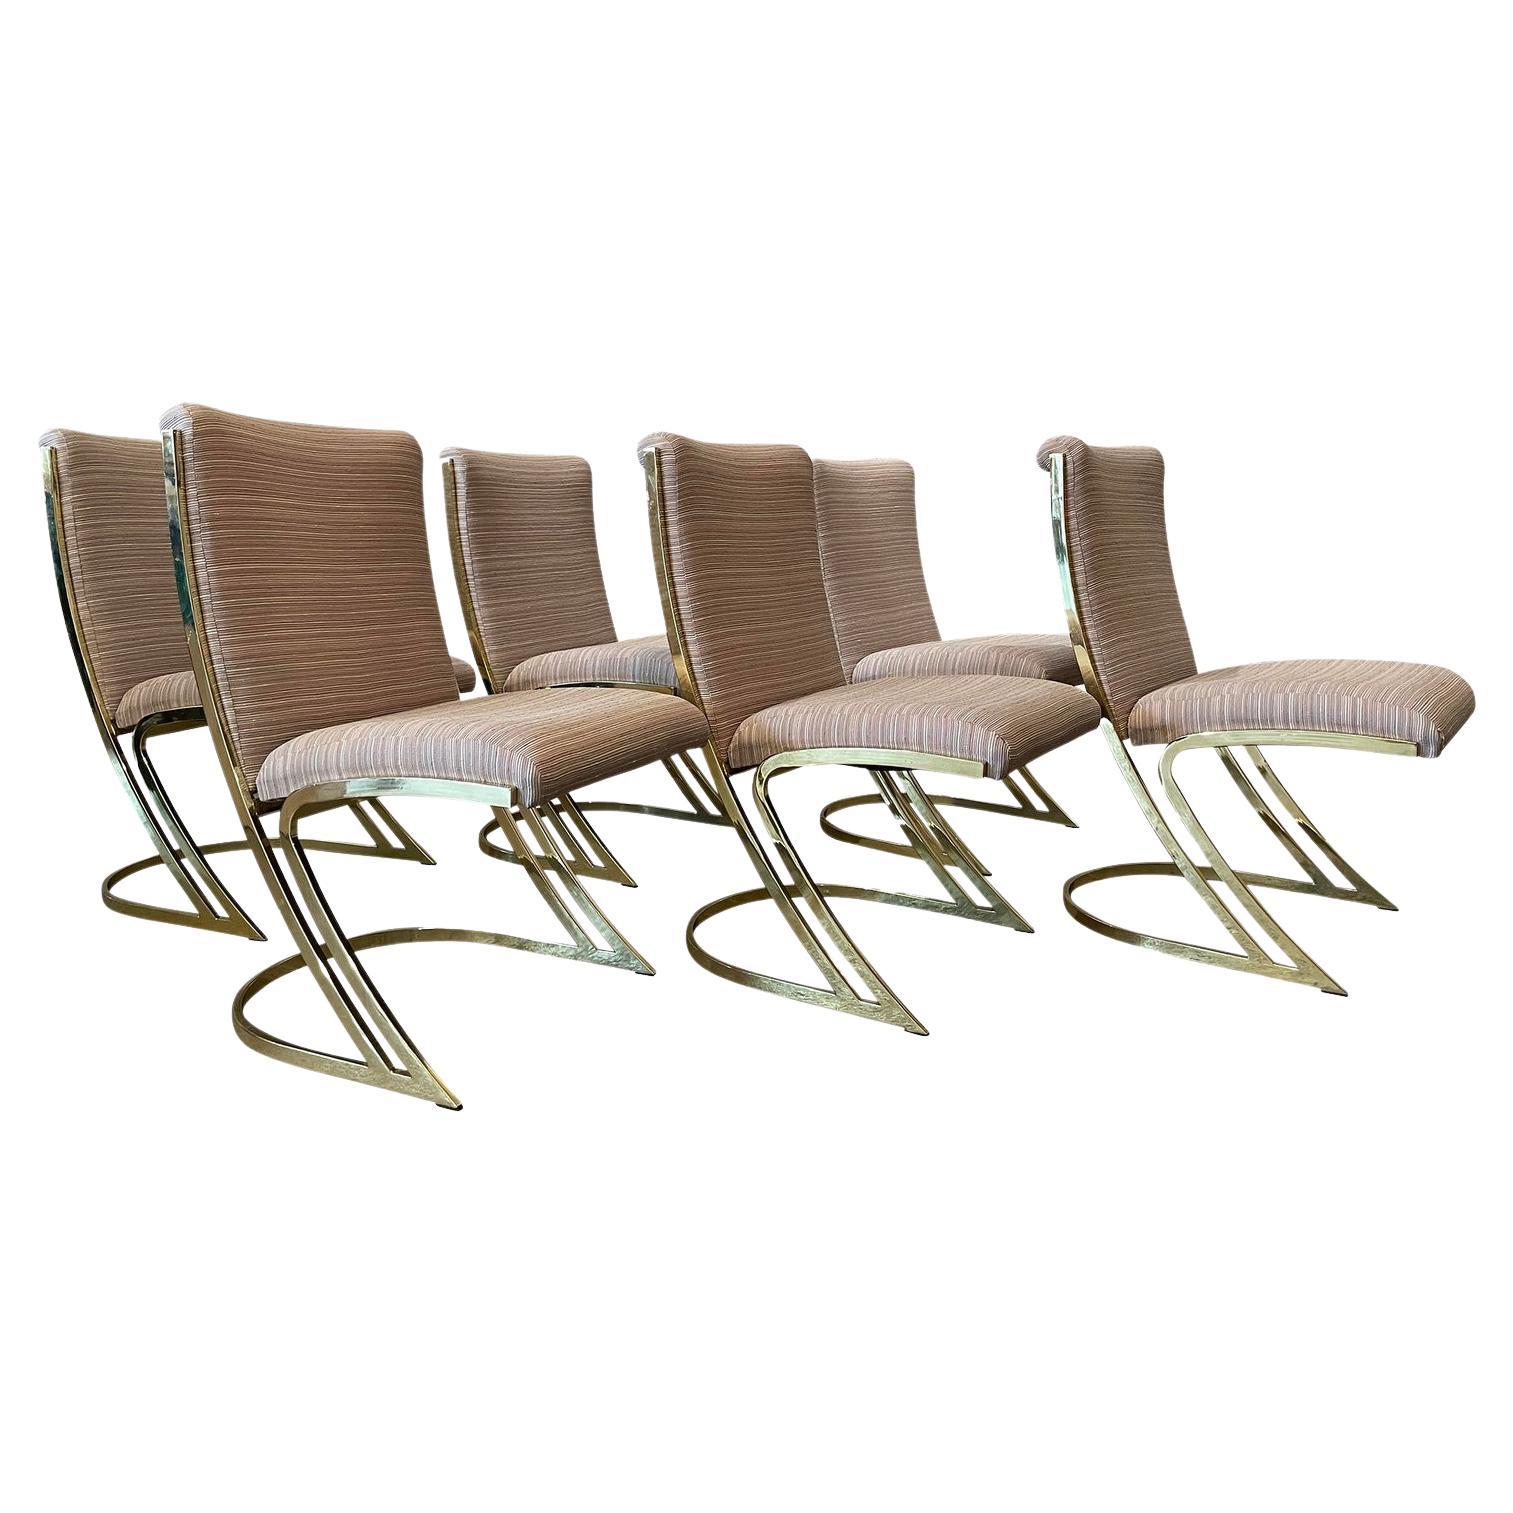 1970s Vintage Pierre Cardin Brass Cantilever Z Chairs, Set of 6